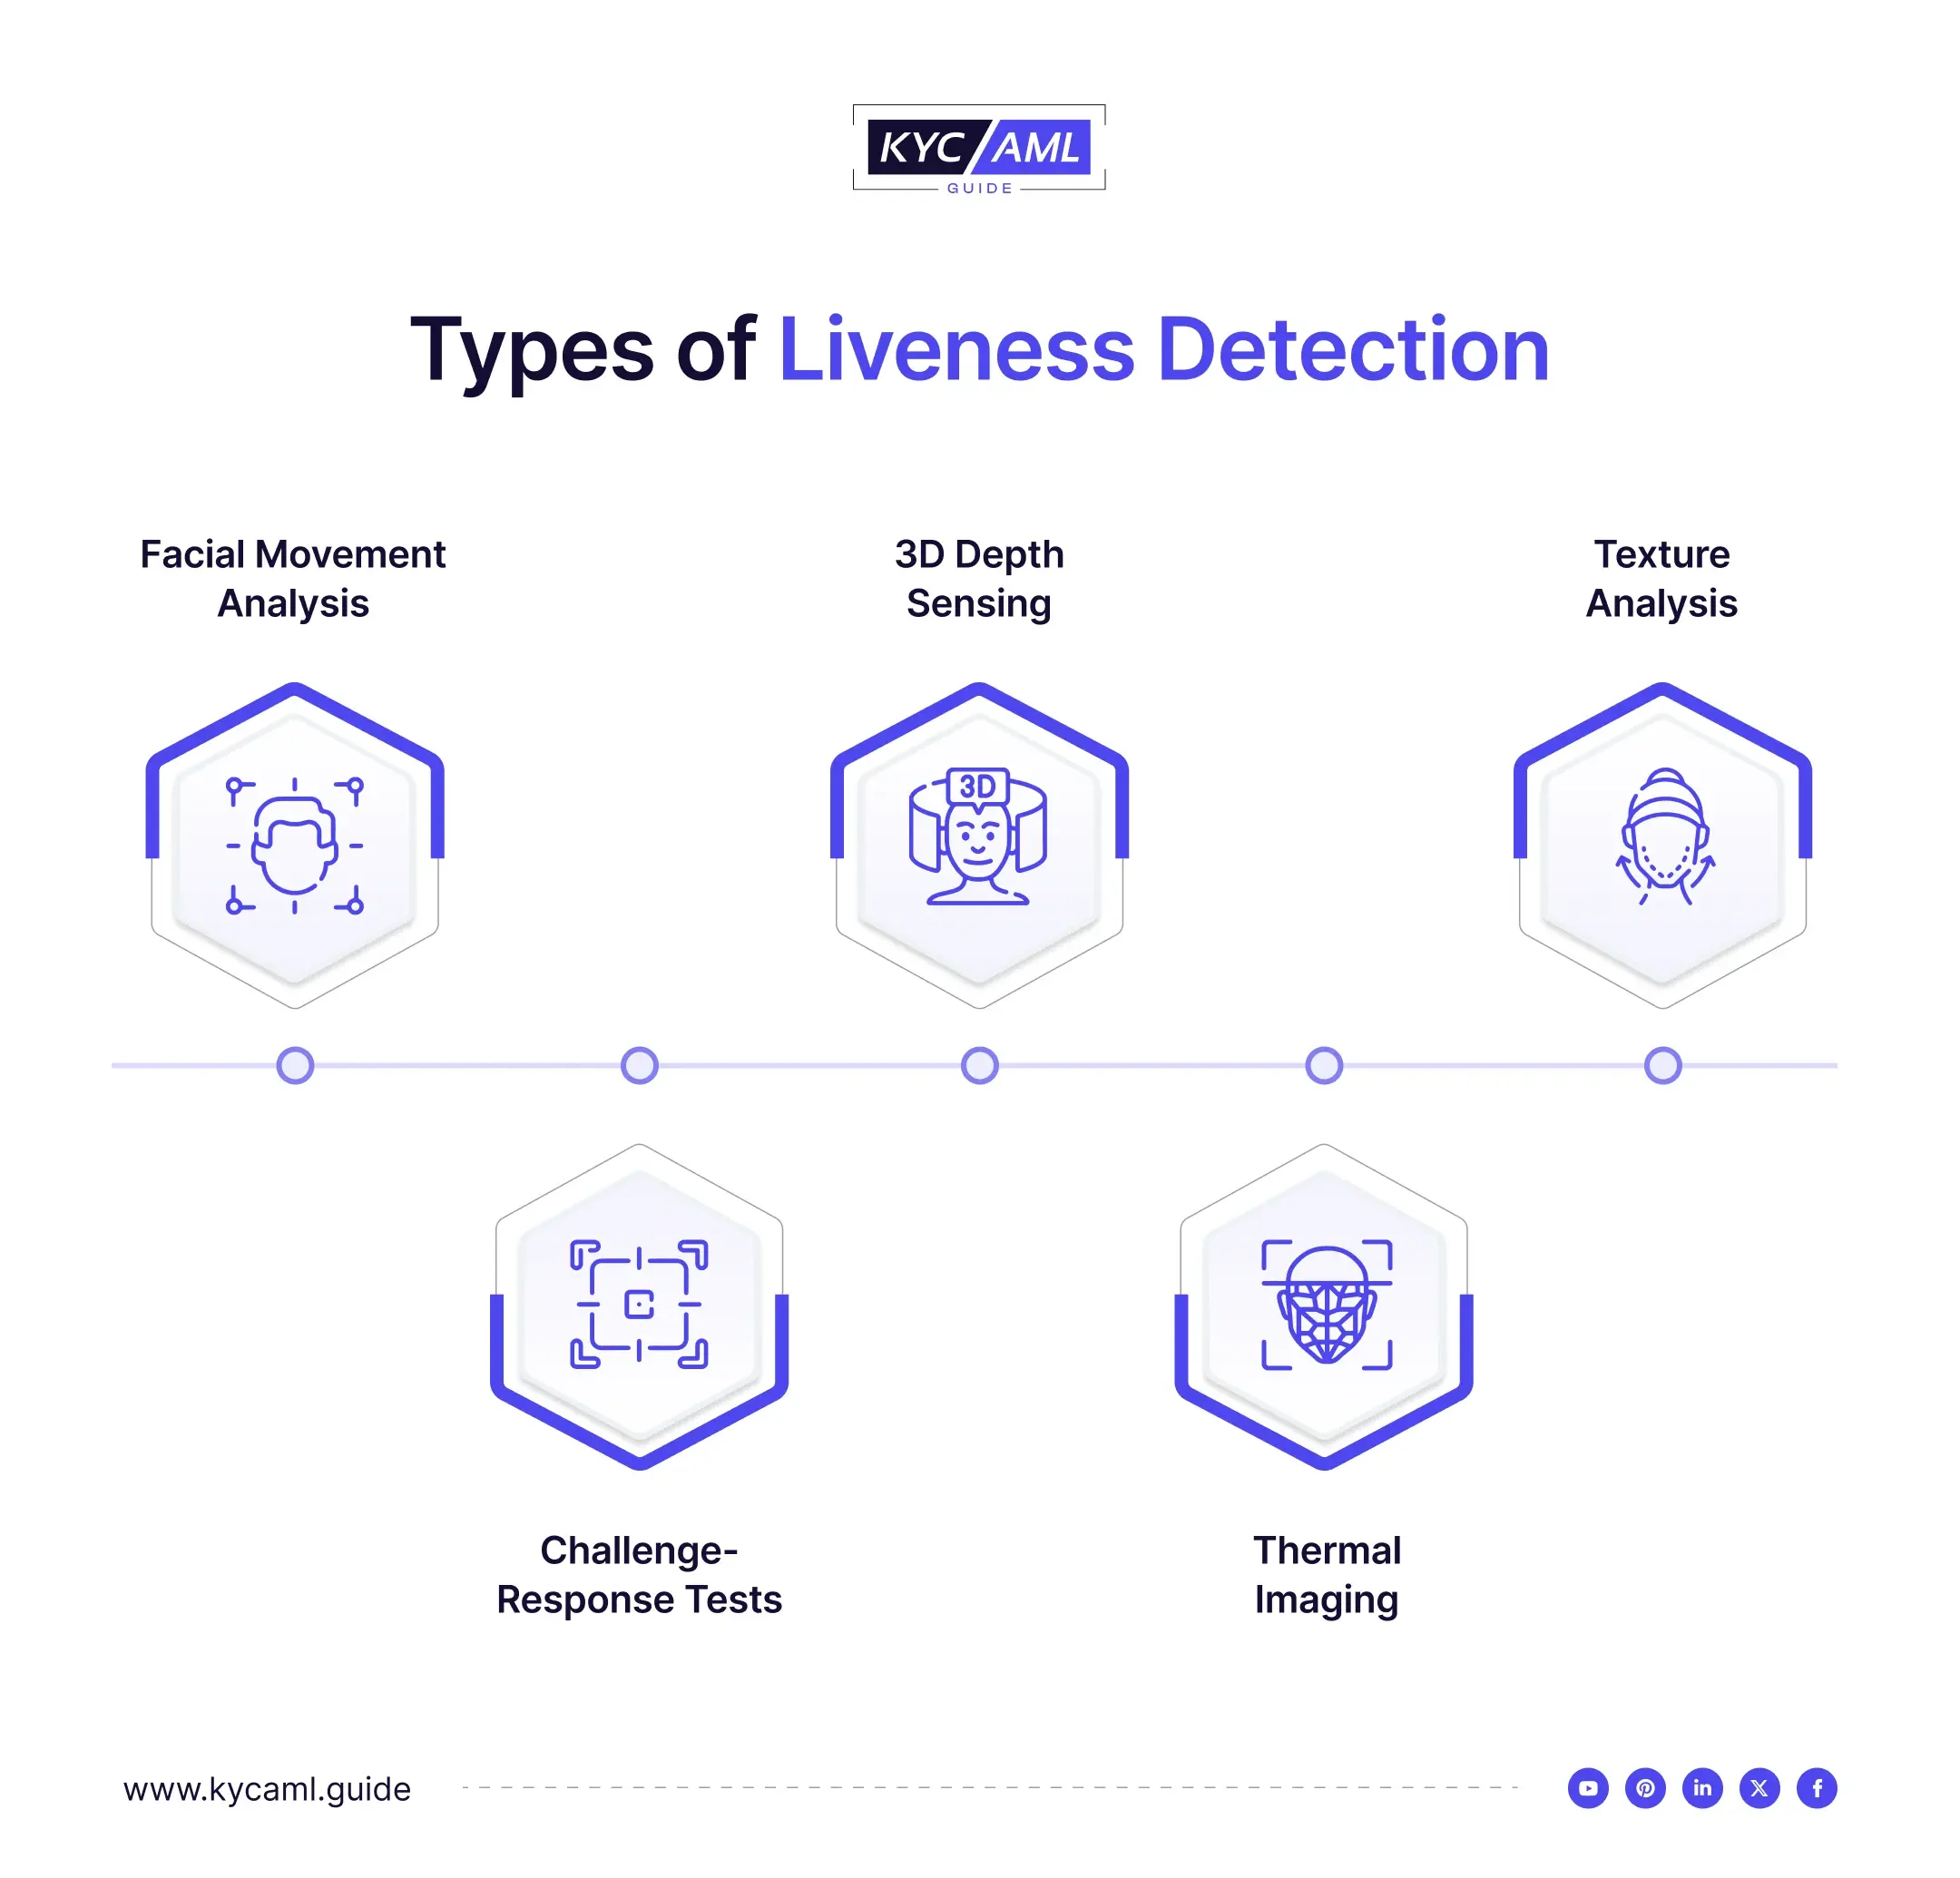 The image shows different types of Liveness Detection used in Identity Verification.